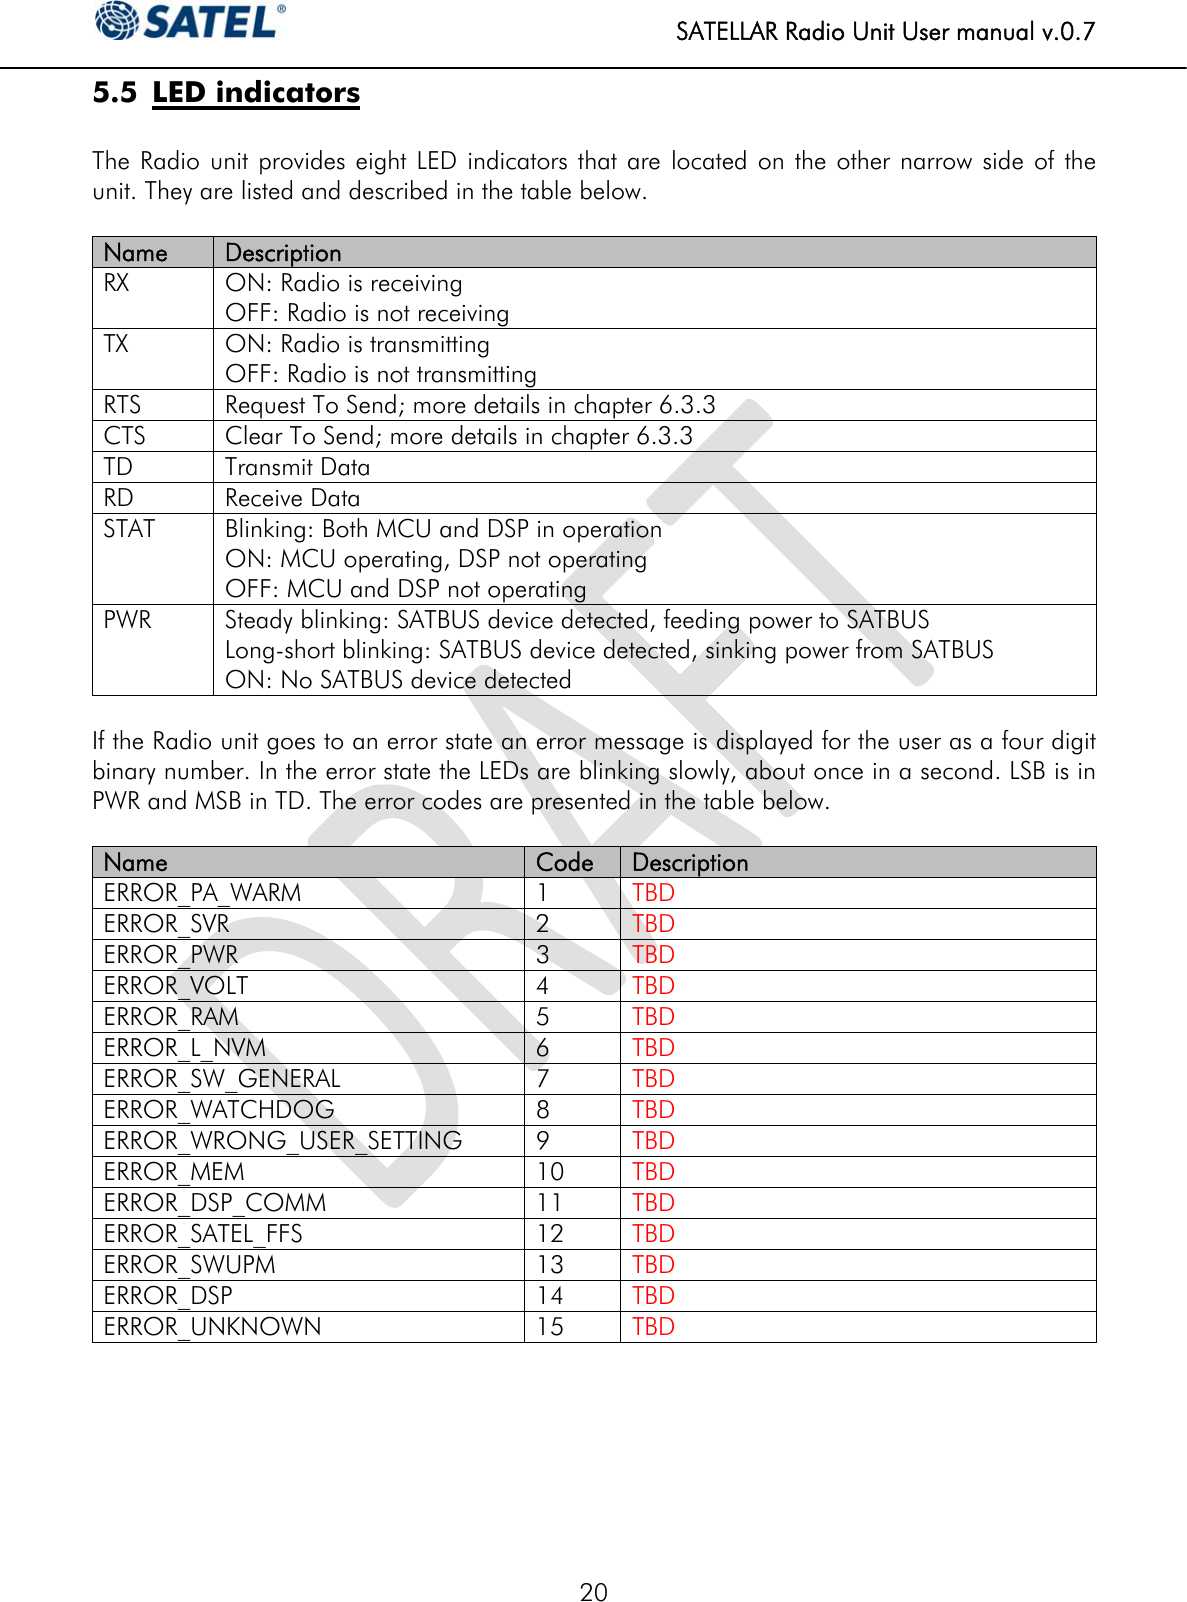   SATELLAR Radio Unit User manual v.0.7  20 5.5 LED indicators  The Radio unit provides eight LED indicators that are located on the other narrow side of the unit. They are listed and described in the table below.  Name  Description RX  ON: Radio is receiving OFF: Radio is not receiving TX  ON: Radio is transmitting OFF: Radio is not transmitting RTS  Request To Send; more details in chapter 6.3.3 CTS  Clear To Send; more details in chapter 6.3.3 TD Transmit Data RD Receive Data STAT  Blinking: Both MCU and DSP in operation ON: MCU operating, DSP not operating OFF: MCU and DSP not operating PWR  Steady blinking: SATBUS device detected, feeding power to SATBUS Long-short blinking: SATBUS device detected, sinking power from SATBUS ON: No SATBUS device detected  If the Radio unit goes to an error state an error message is displayed for the user as a four digit binary number. In the error state the LEDs are blinking slowly, about once in a second. LSB is in PWR and MSB in TD. The error codes are presented in the table below.   Name  Code Description ERROR_PA_WARM 1 TBD ERROR_SVR 2 TBD ERROR_PWR 3 TBD ERROR_VOLT 4 TBD ERROR_RAM 5 TBD ERROR_L_NVM 6 TBD ERROR_SW_GENERAL 7 TBD ERROR_WATCHDOG 8 TBD ERROR_WRONG_USER_SETTING         9 TBD ERROR_MEM 10 TBD ERROR_DSP_COMM 11 TBD ERROR_SATEL_FFS 12 TBD ERROR_SWUPM 13 TBD ERROR_DSP 14 TBD ERROR_UNKNOWN 15 TBD       